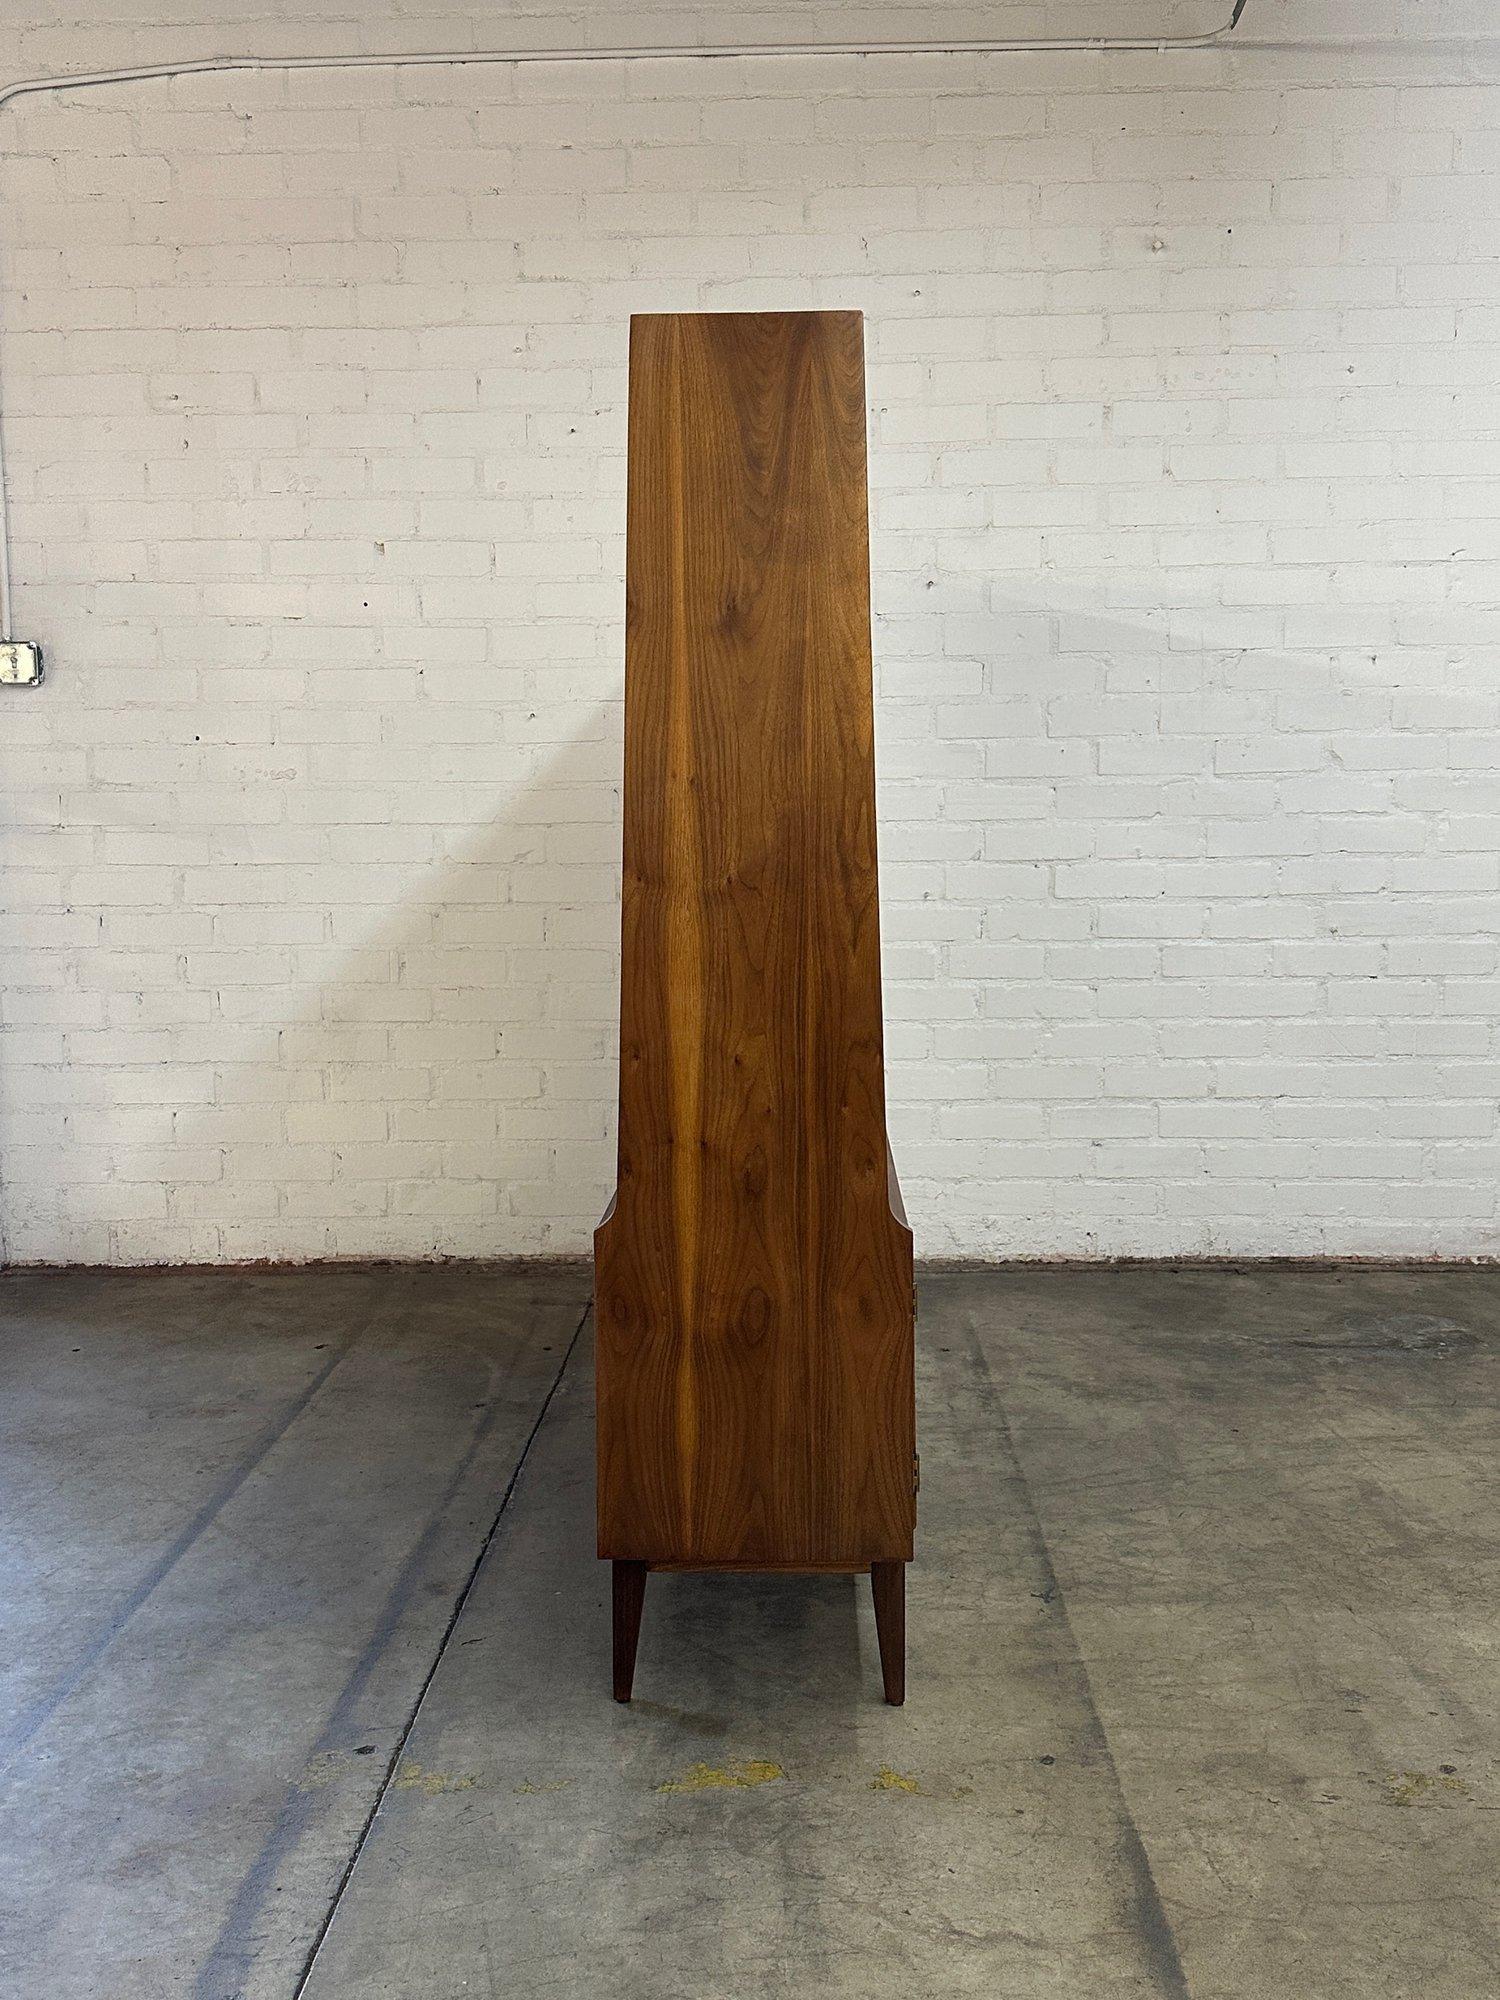 Freestanding Mid Century Wall Unit / Room Divider In Good Condition For Sale In Los Angeles, CA